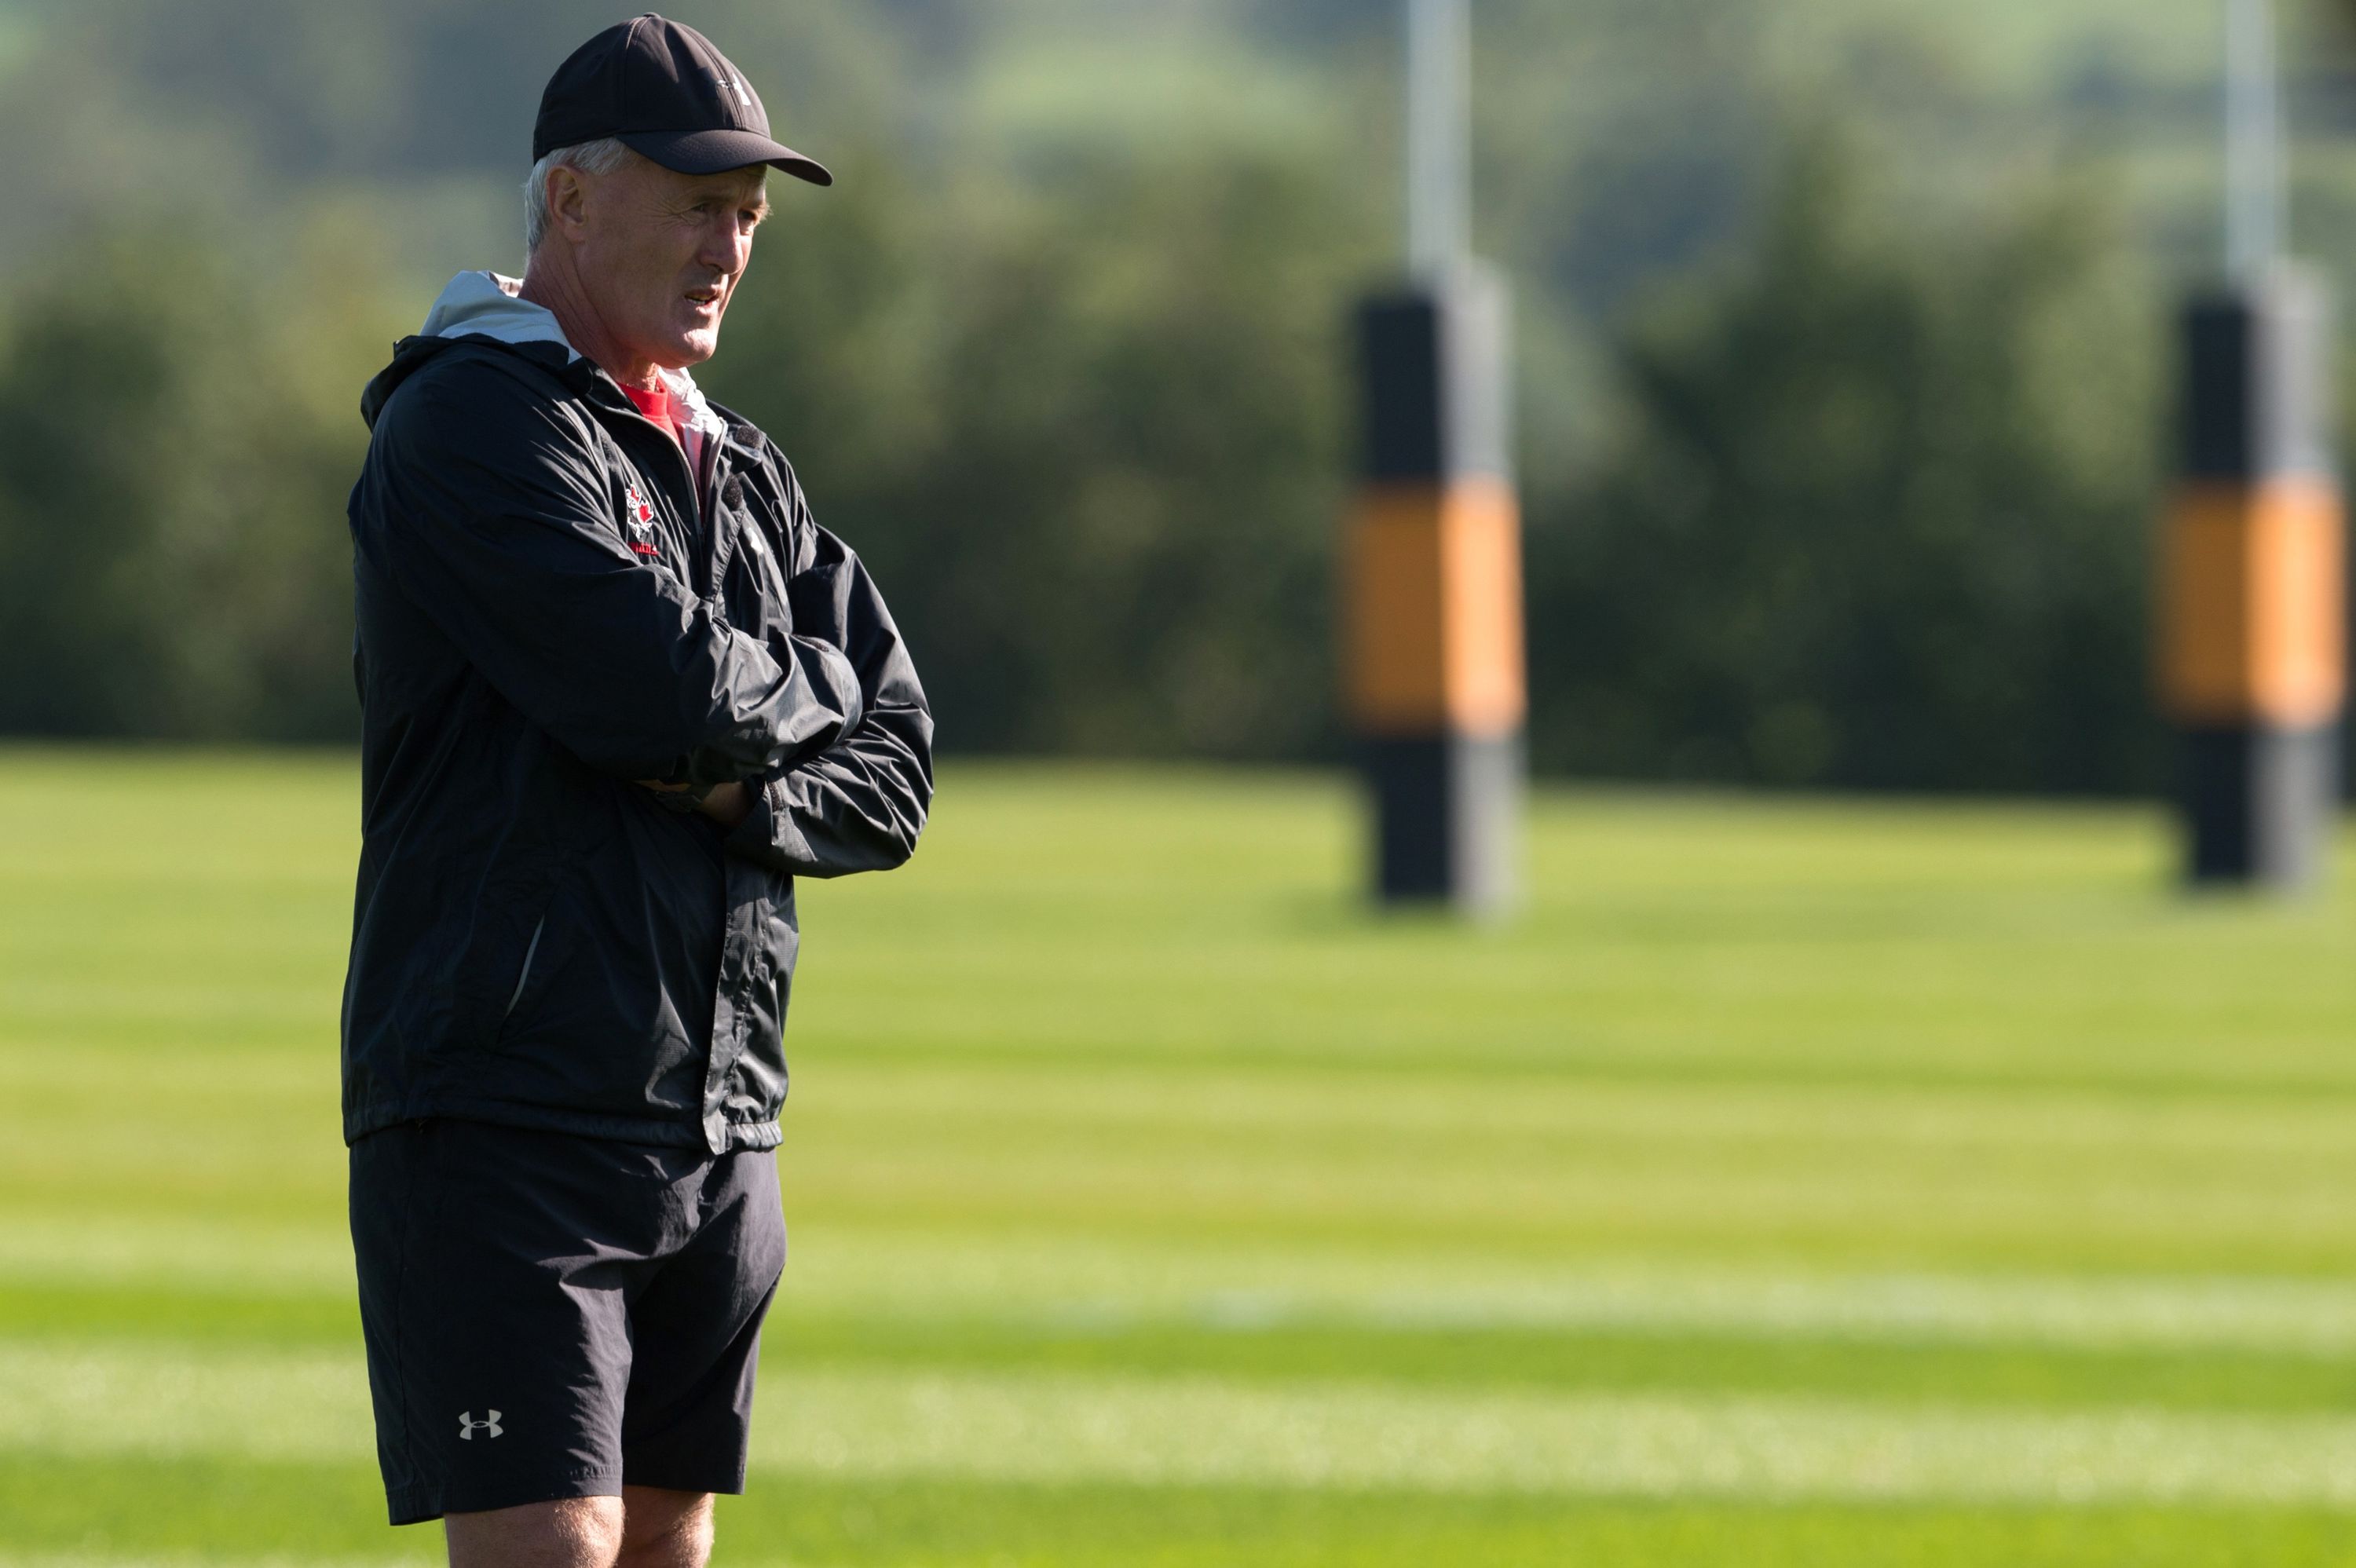 Canada's New Zealander coach Kieran Crowley looks at his players during a team training session at Leicester Grammar School in Leicester on September 28, 2015, during the 2015 Rugby Union World Cup. AFP PHOTO / BERTRAND LANGLOIS RESTRICTED TO EDITORIAL USE (Photo credit should read BERTRAND LANGLOIS/AFP/Getty Images)